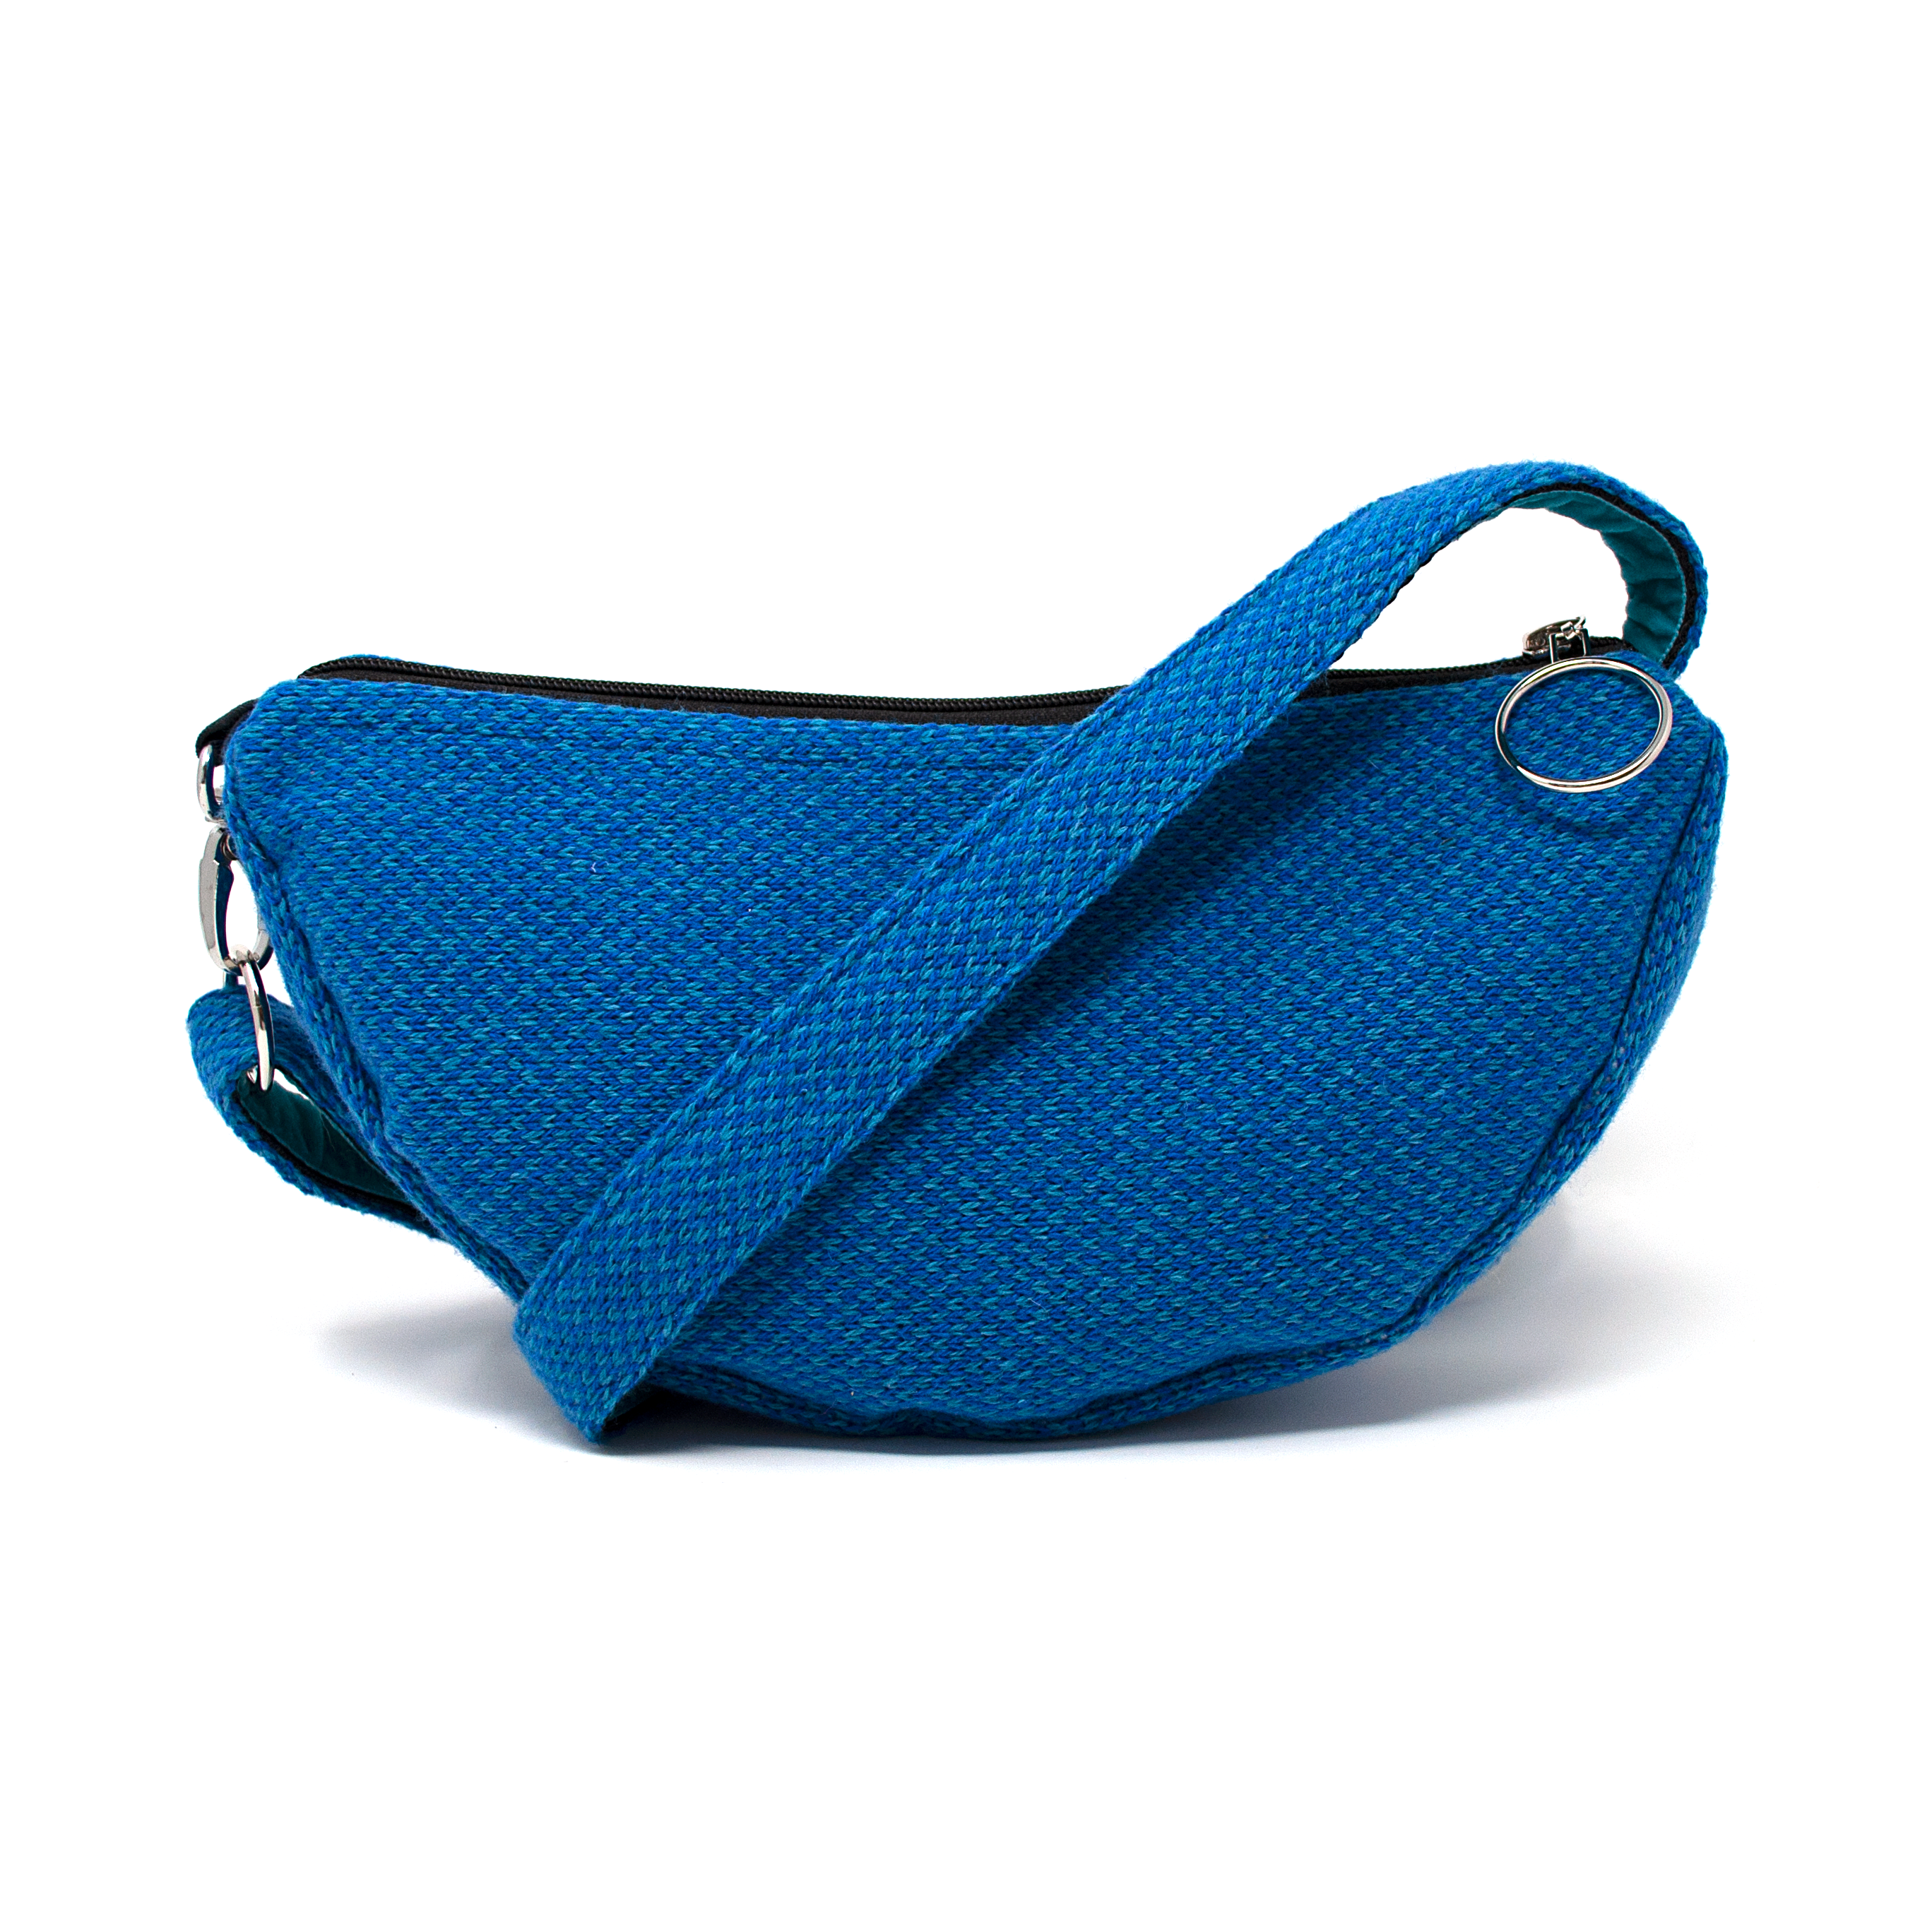 KLEIO Sling and Cross Bags : Buy KLEIO Quilted Travelling Crossbody Sling  Bag for Women Girls Royal Blue Online | Nykaa Fashion